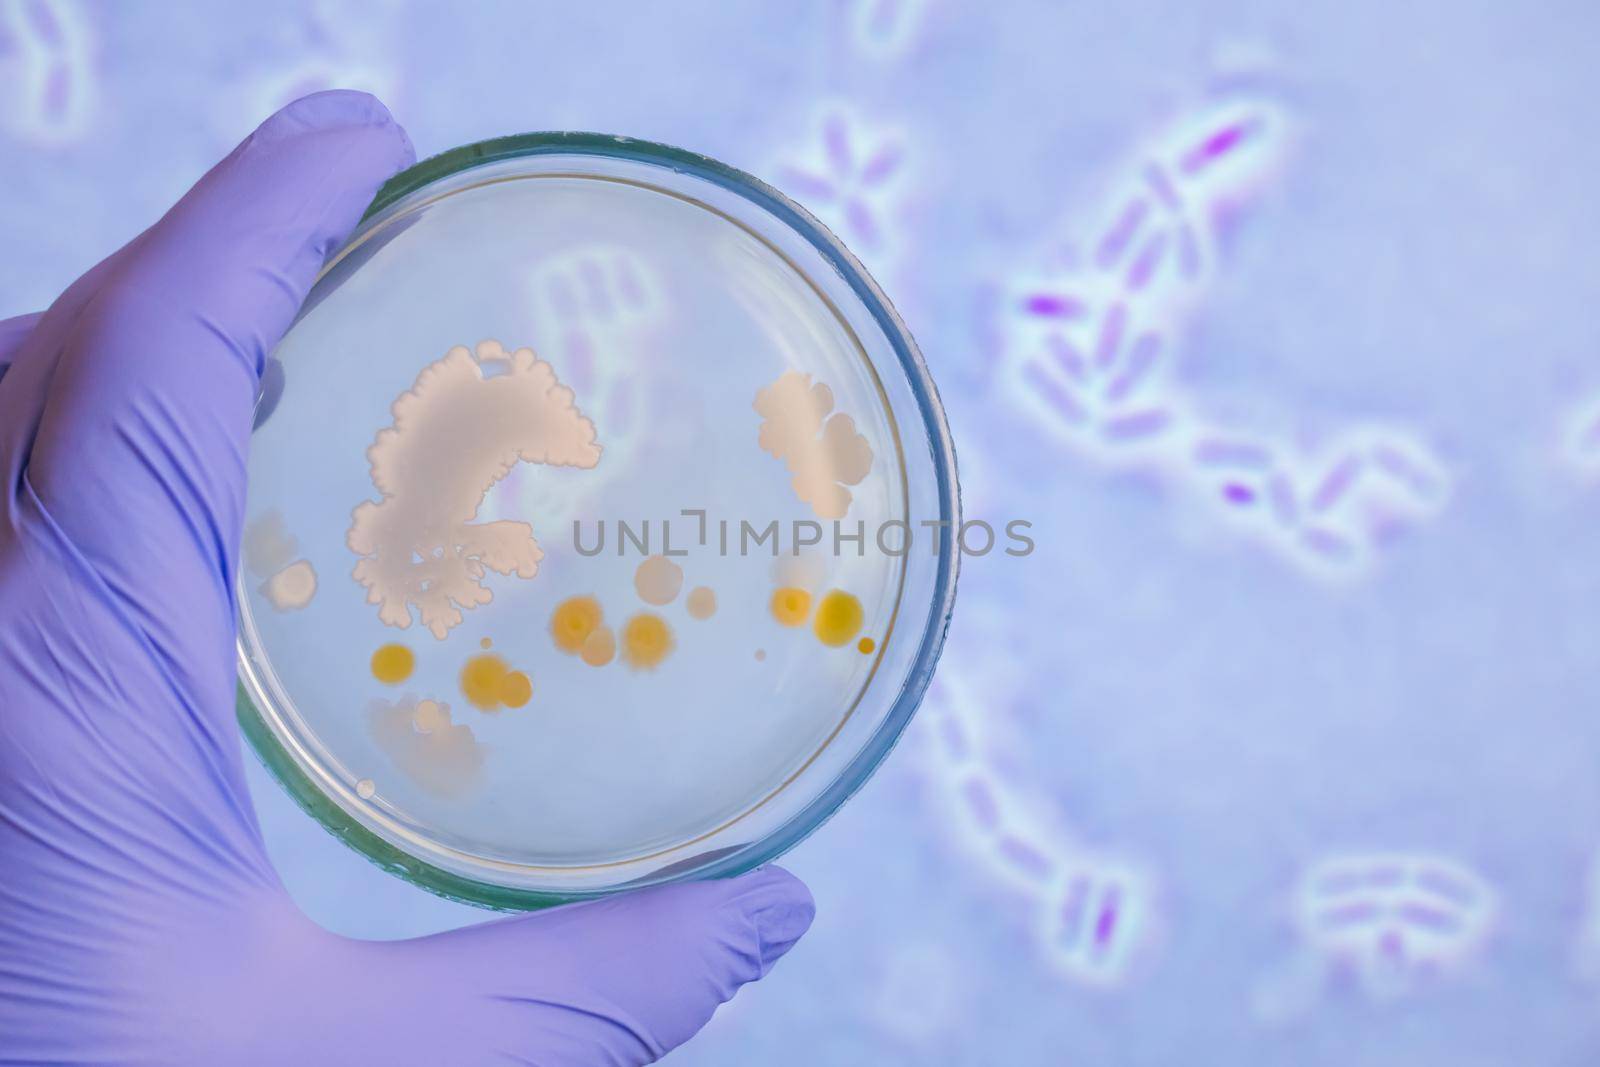 Analysis of bacterial colonies on a petri dish against bacteria. The scientist in his hand holds a Petri dish against the background of bacteria.